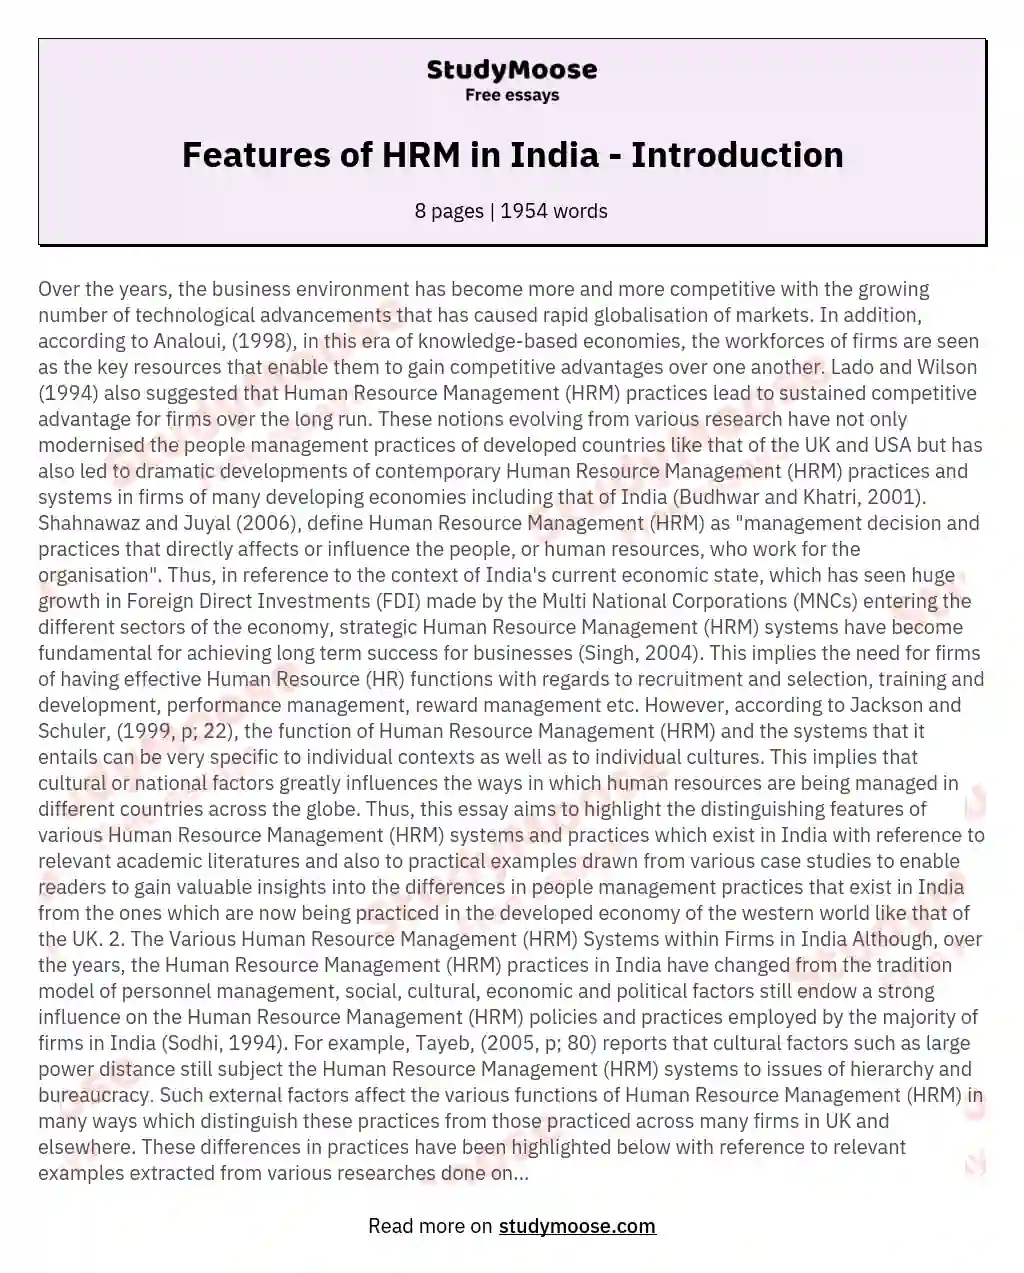 Features of HRM in India - Introduction essay